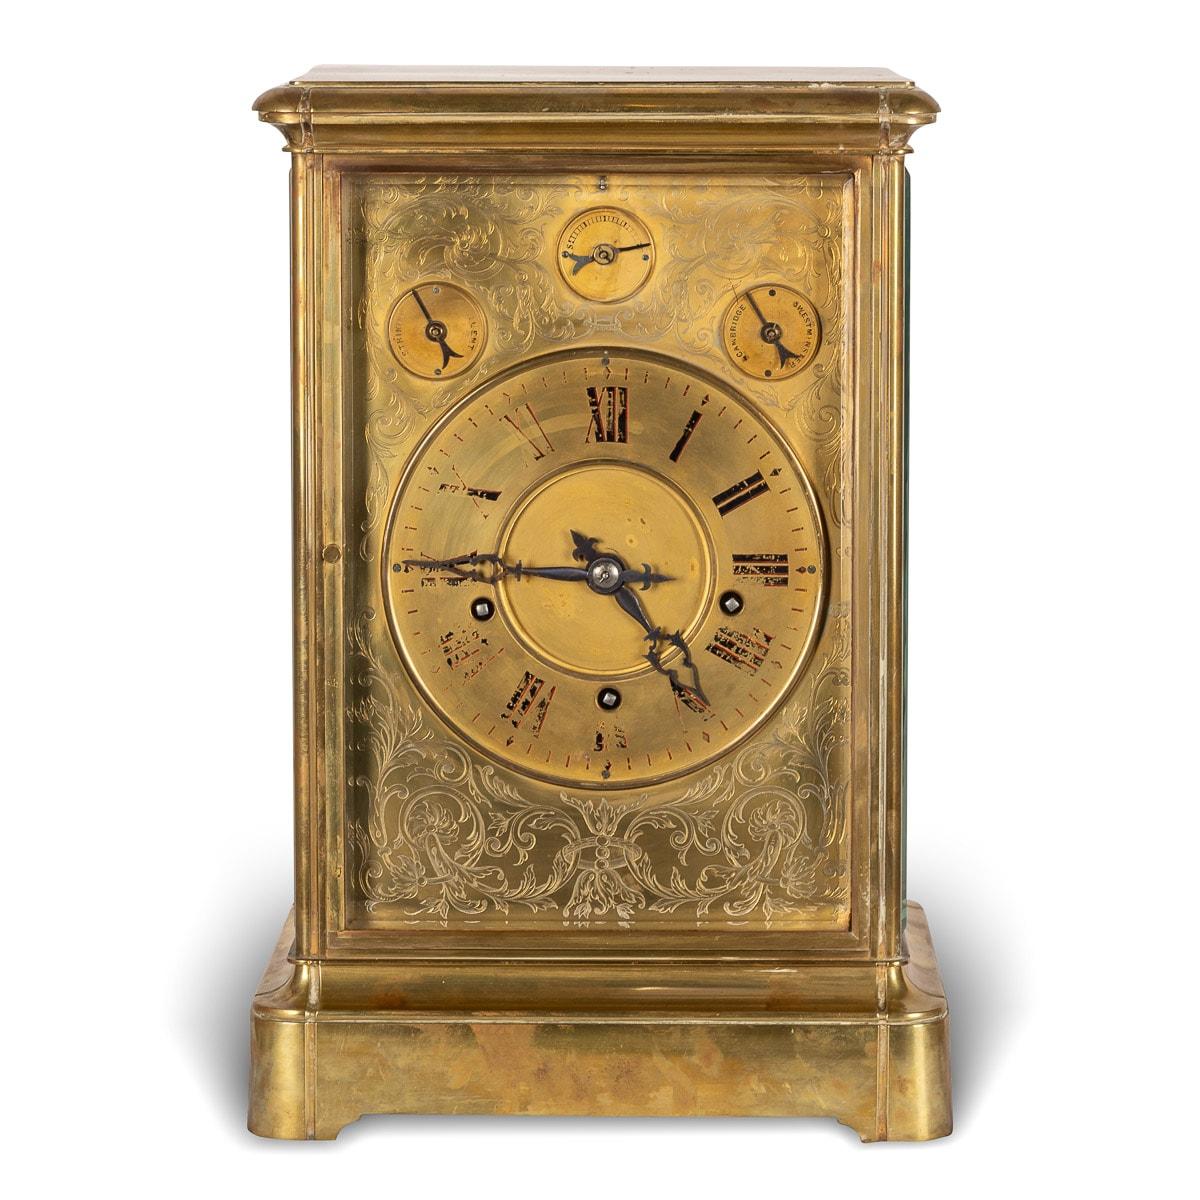 Antique 19th Century Victorian monumental mantle clock. The foliate engraved gilt-brass dial with enamel painted roman numerals and three dials above. Inside with eight day movement with strike on bell. The clock appears to be in working order, but